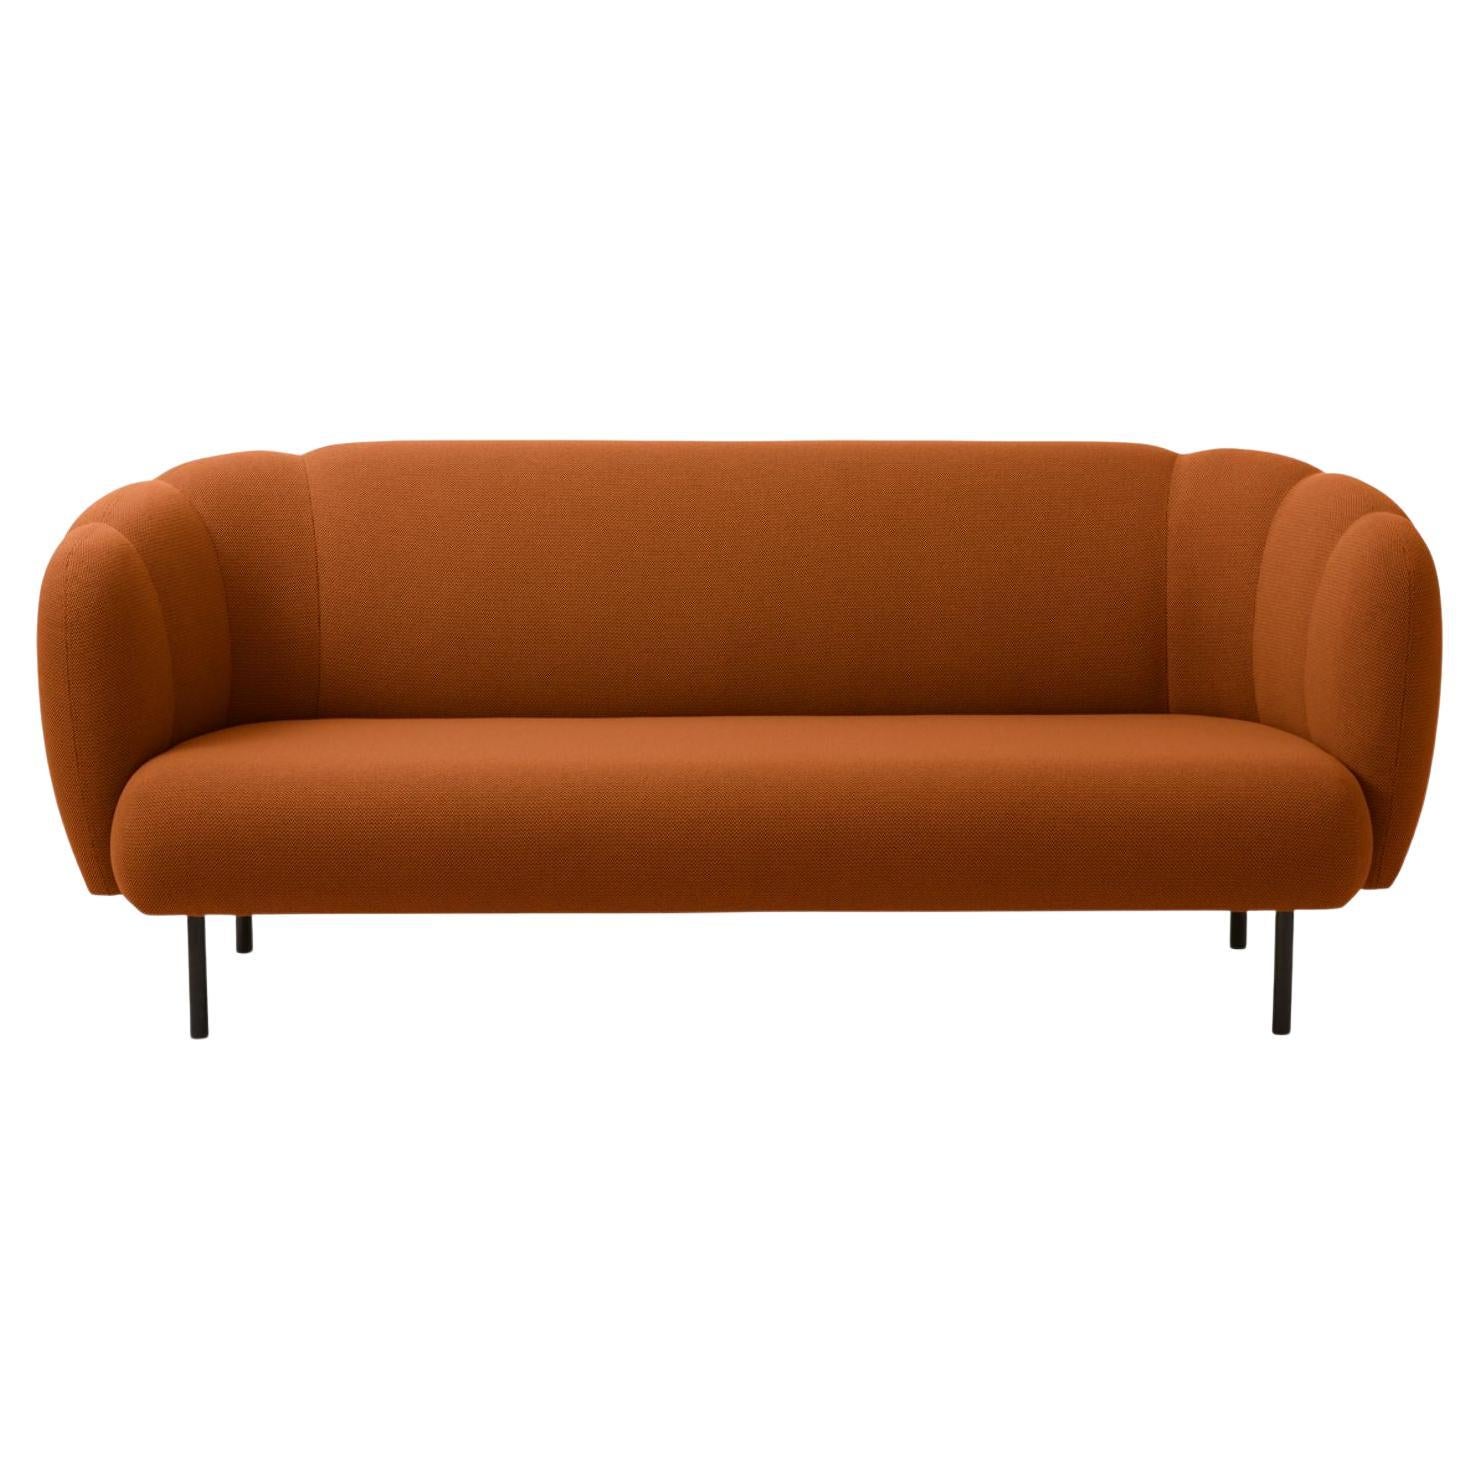 Caper 3 Seater with Stitches Terracotta by Warm Nordic For Sale